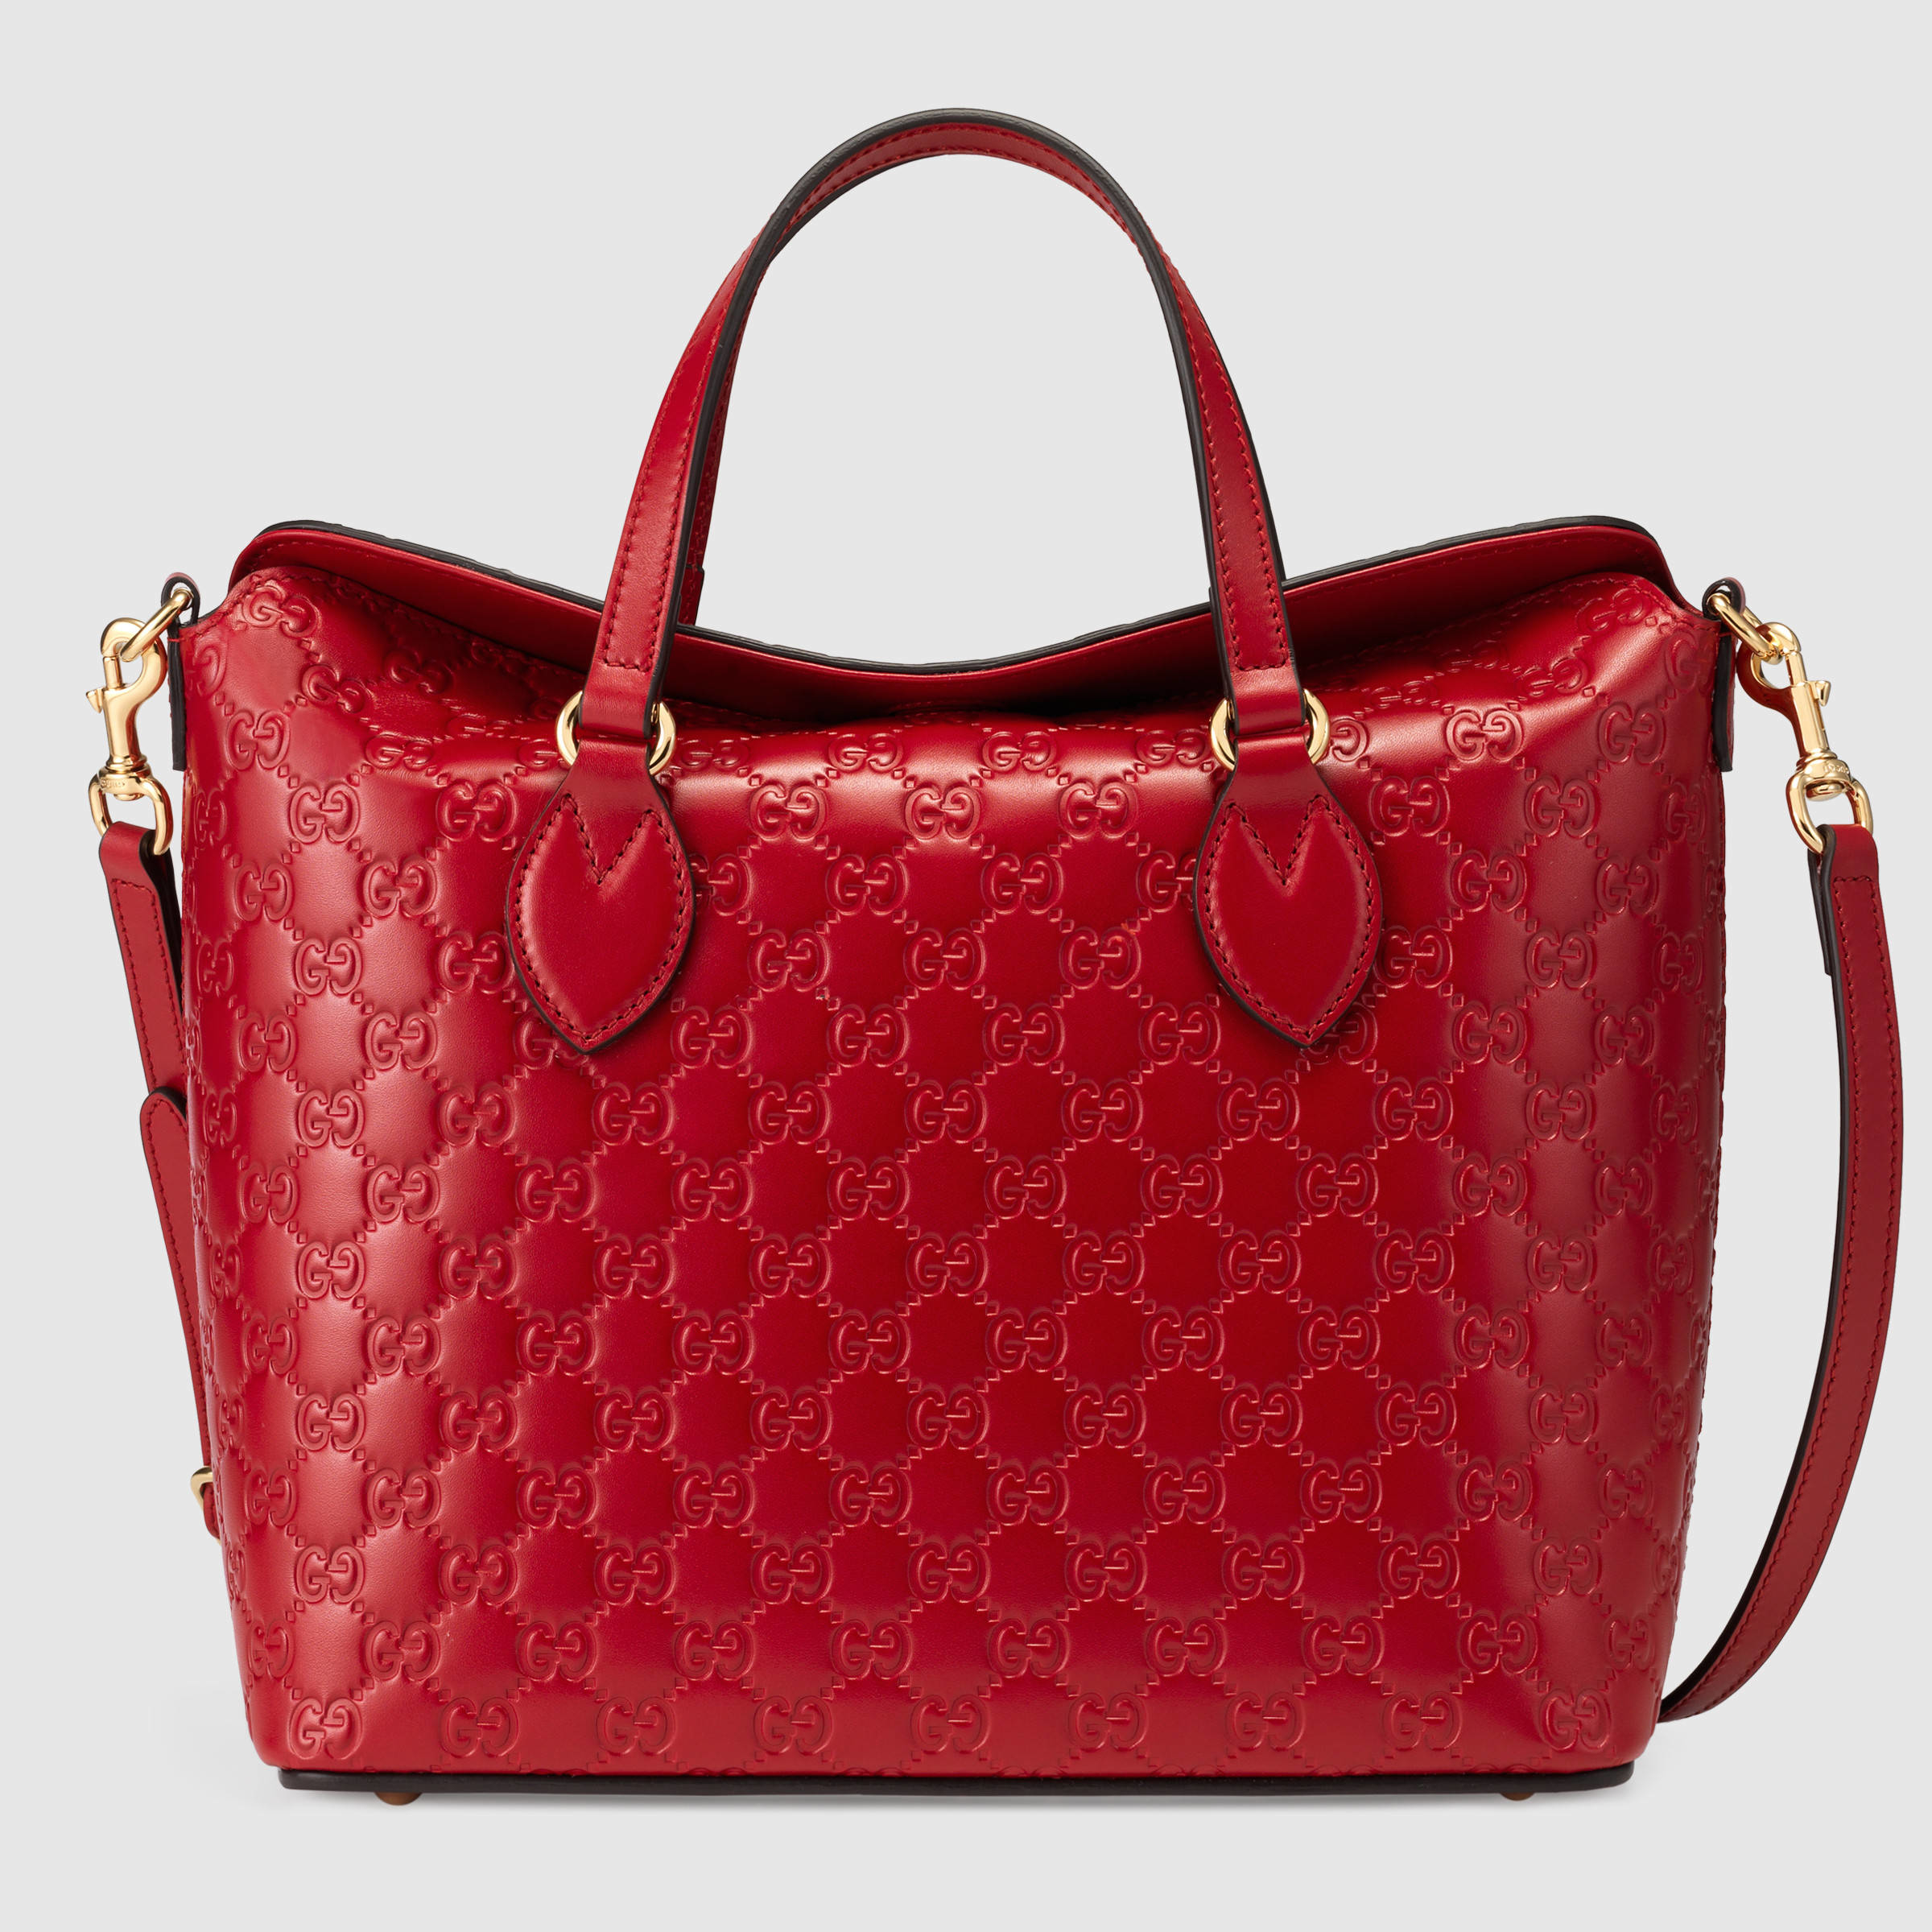 Red Leather Purse Discount, SAVE 39% - mpgc.net